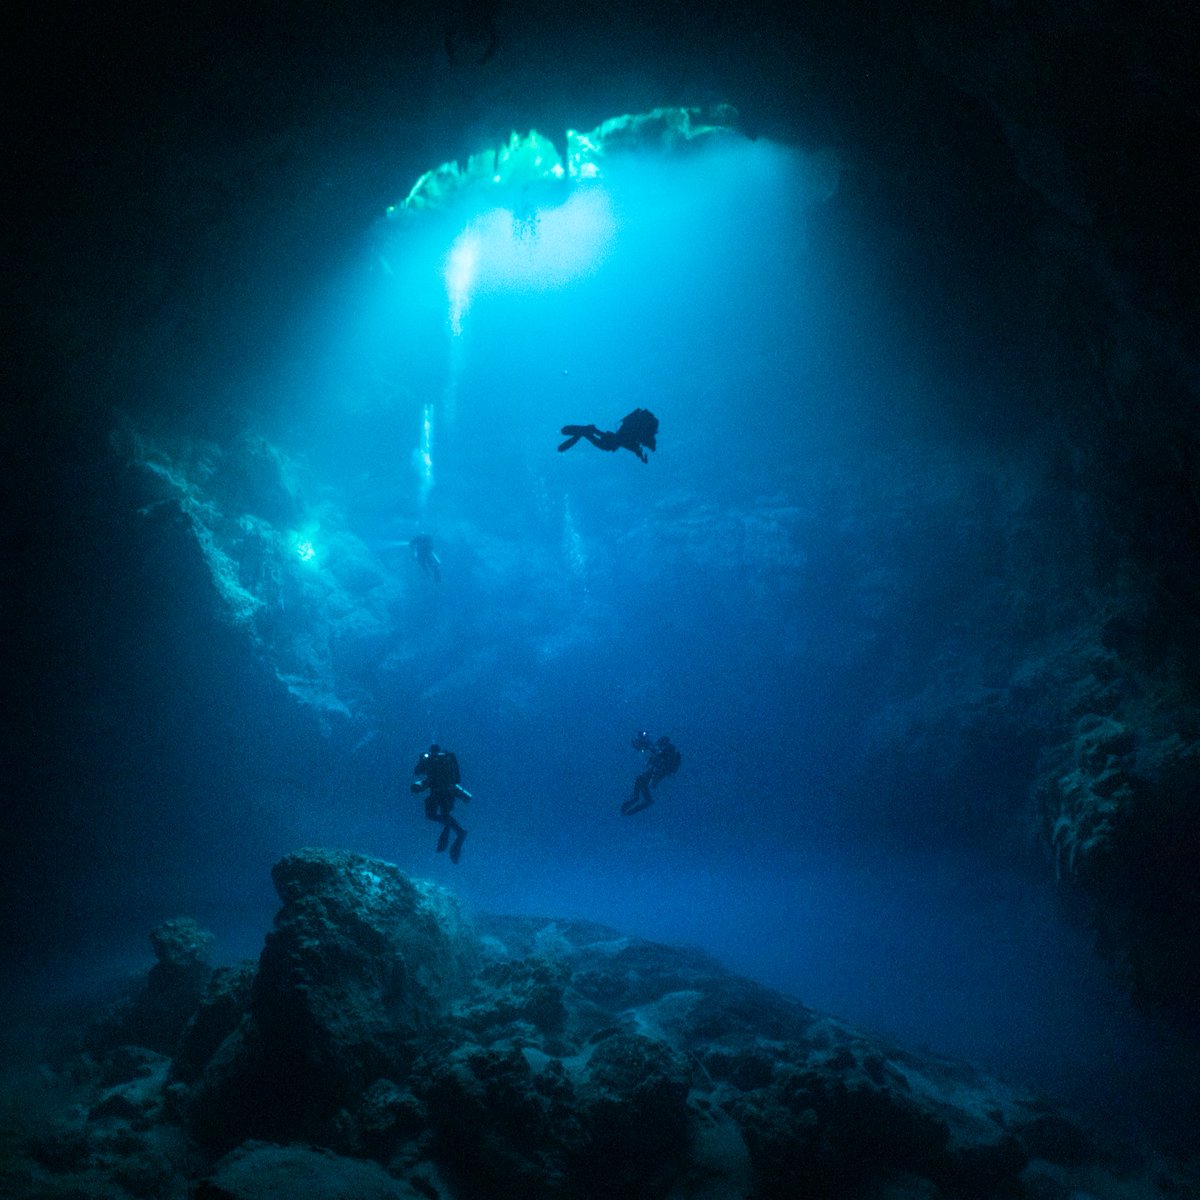 Get behind the scenes insight from cave diving icon @jillheinerth in her unprecedented exploration of underwater realms. Follow @divingintothedarkness or sign up for their newsletter for more into the world of technical, cave diving. #DivingintotheDarkness divingintothedarkness.com